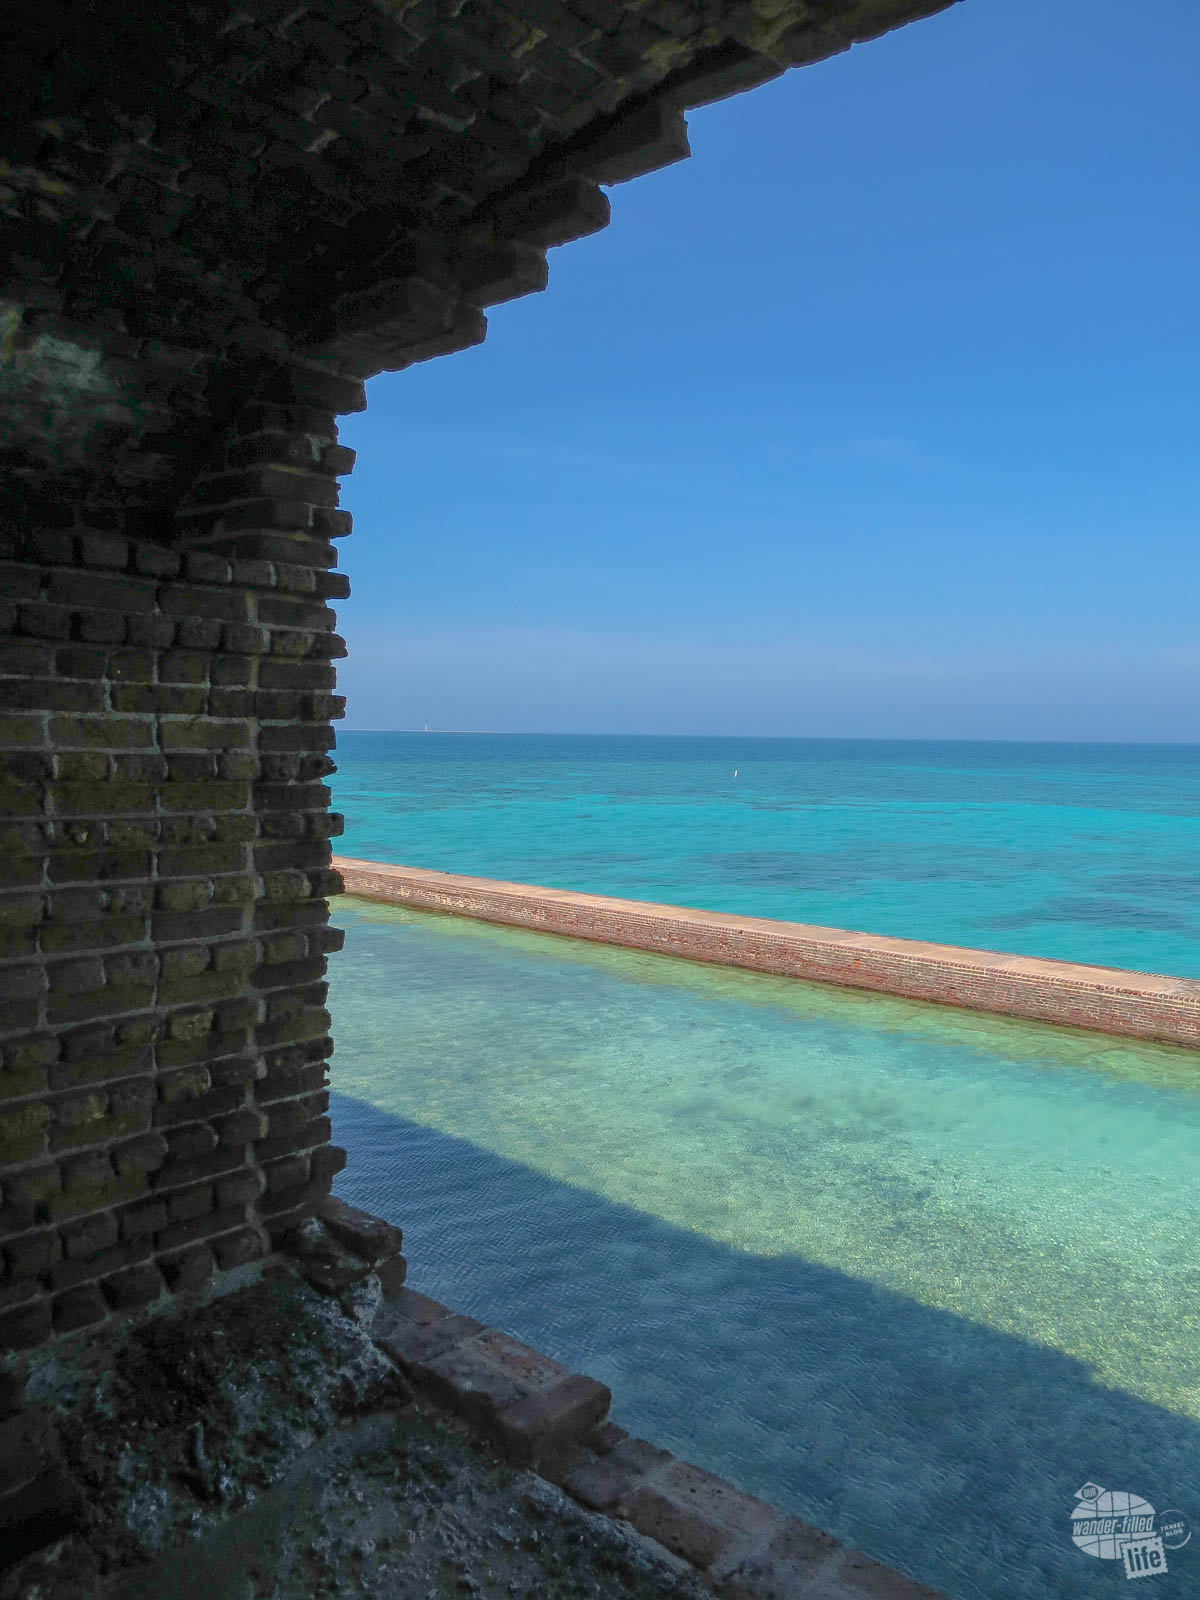 The blue waters at Dry Tortugas NP are a highlight of the South Florida national parks.